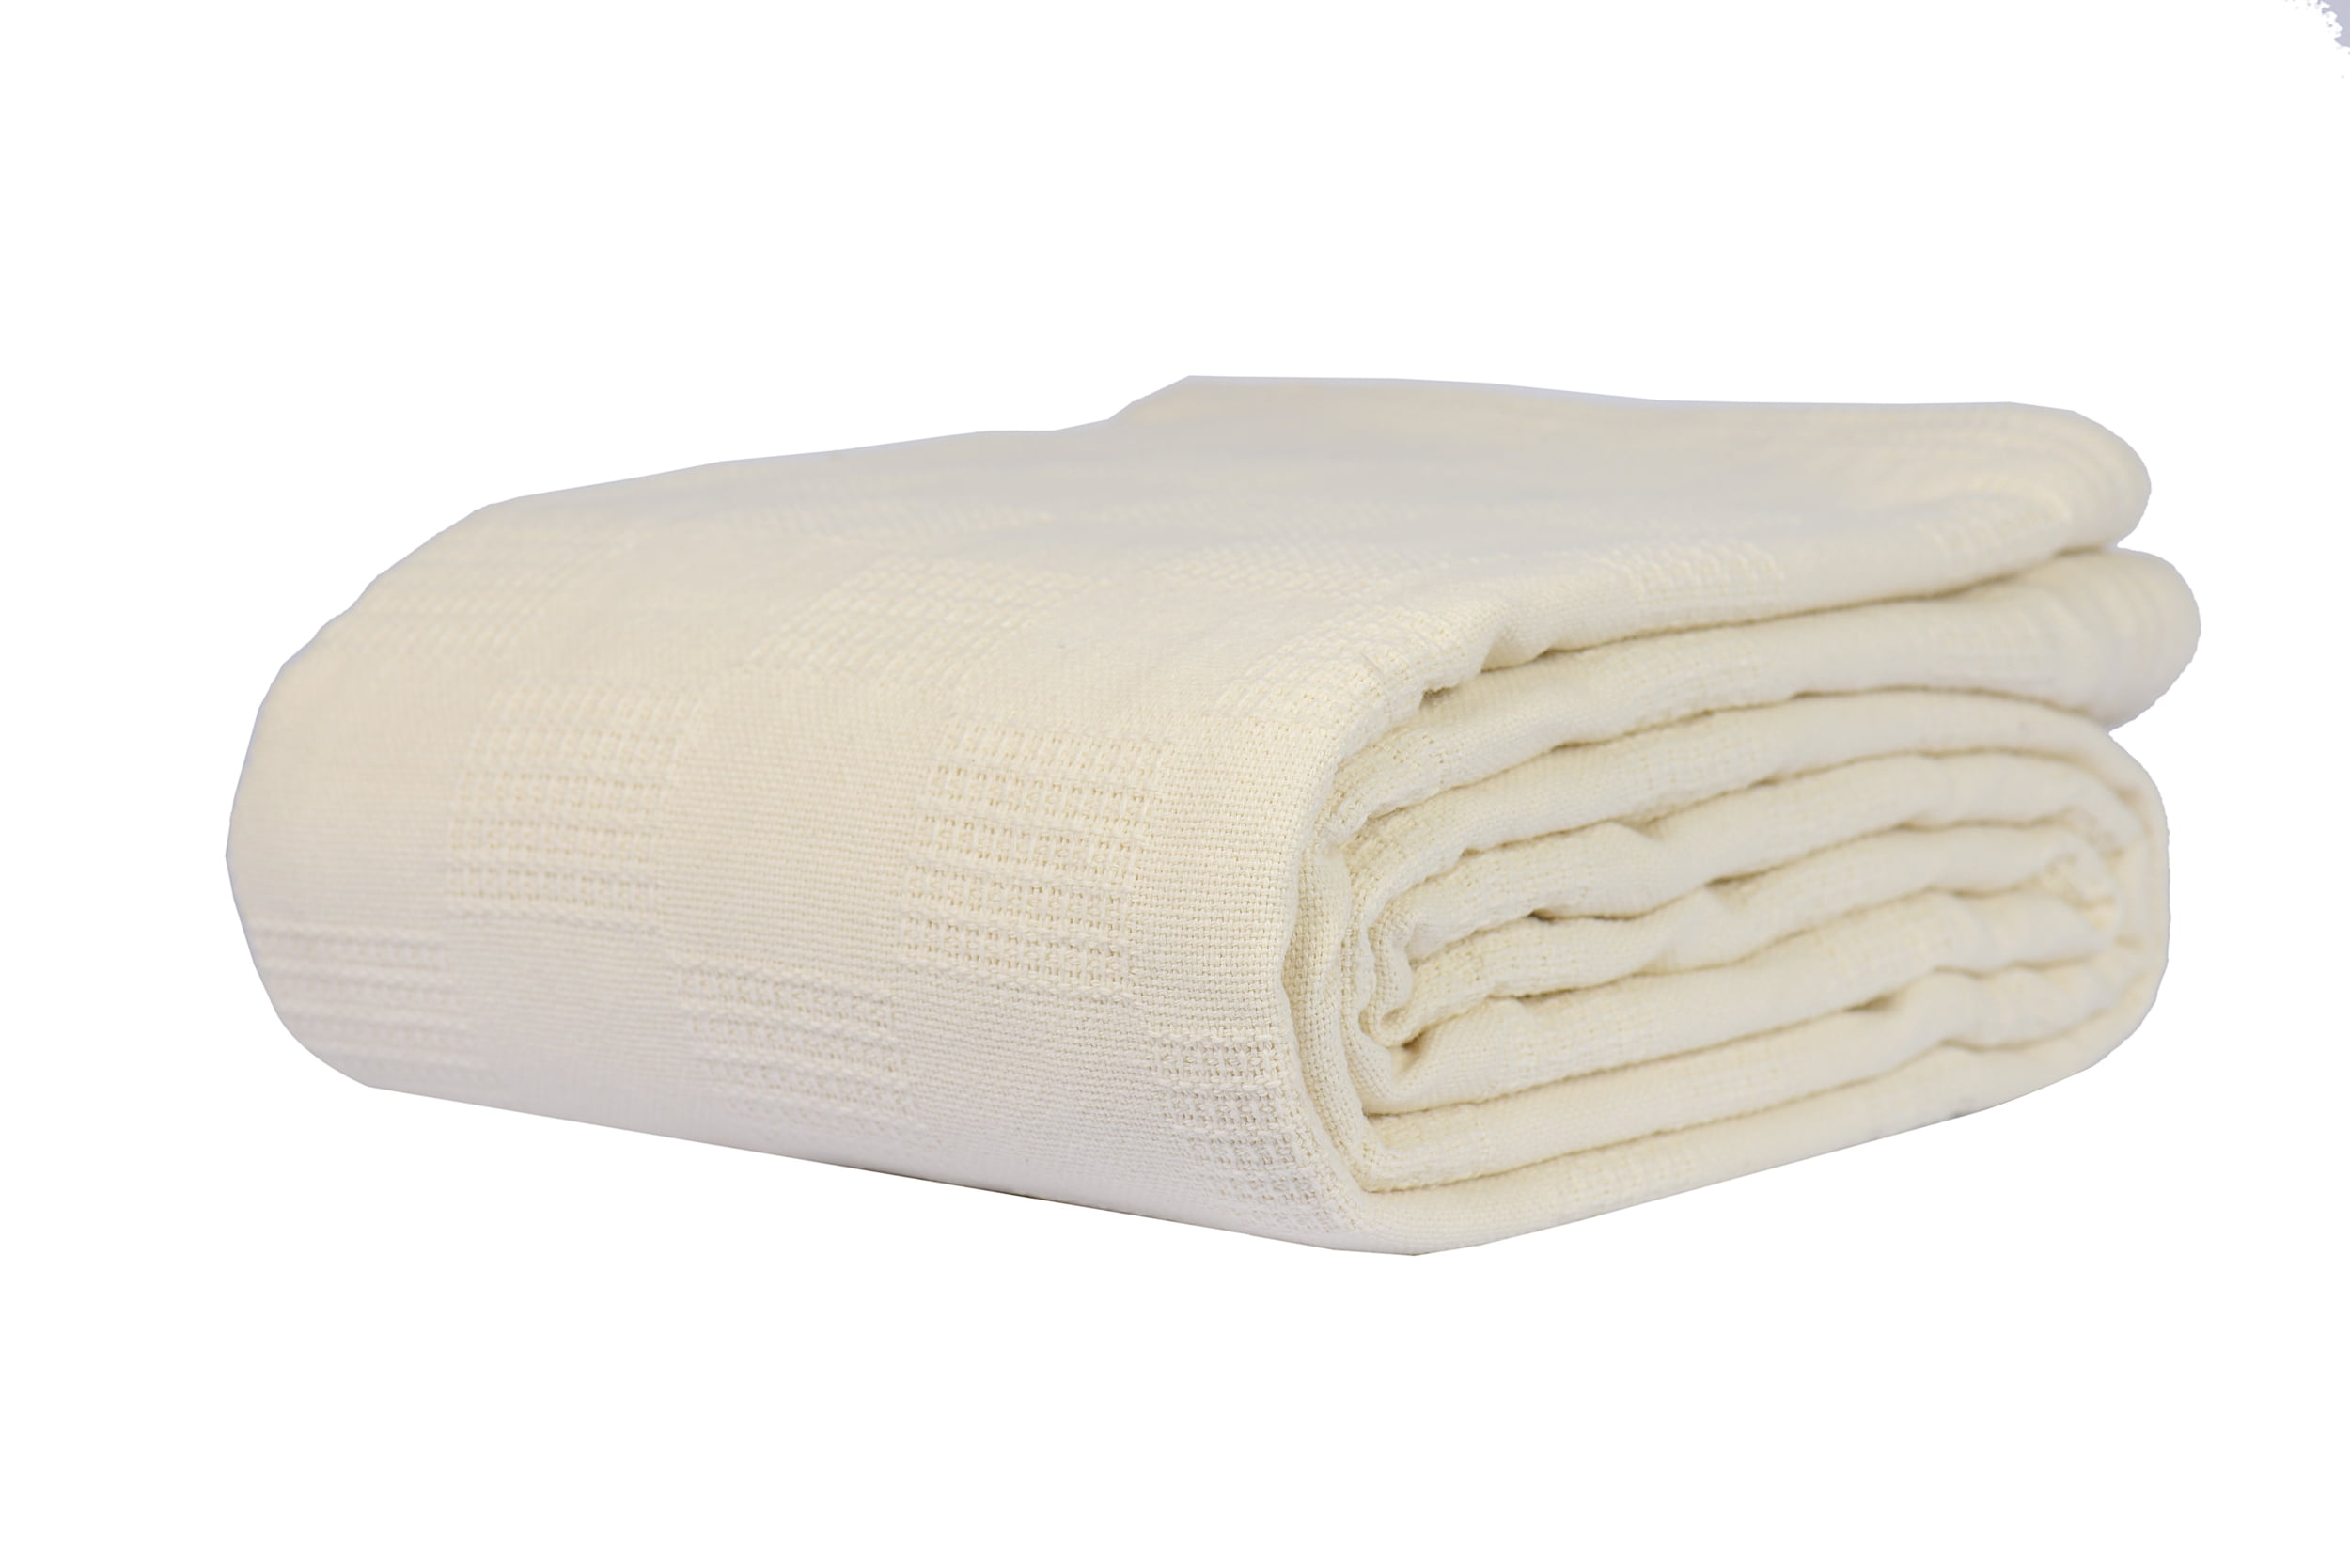 White) Textile Spread SNAGLESS Cotton in, Hospital Thermal Blanket, Linteum 100% (74x100